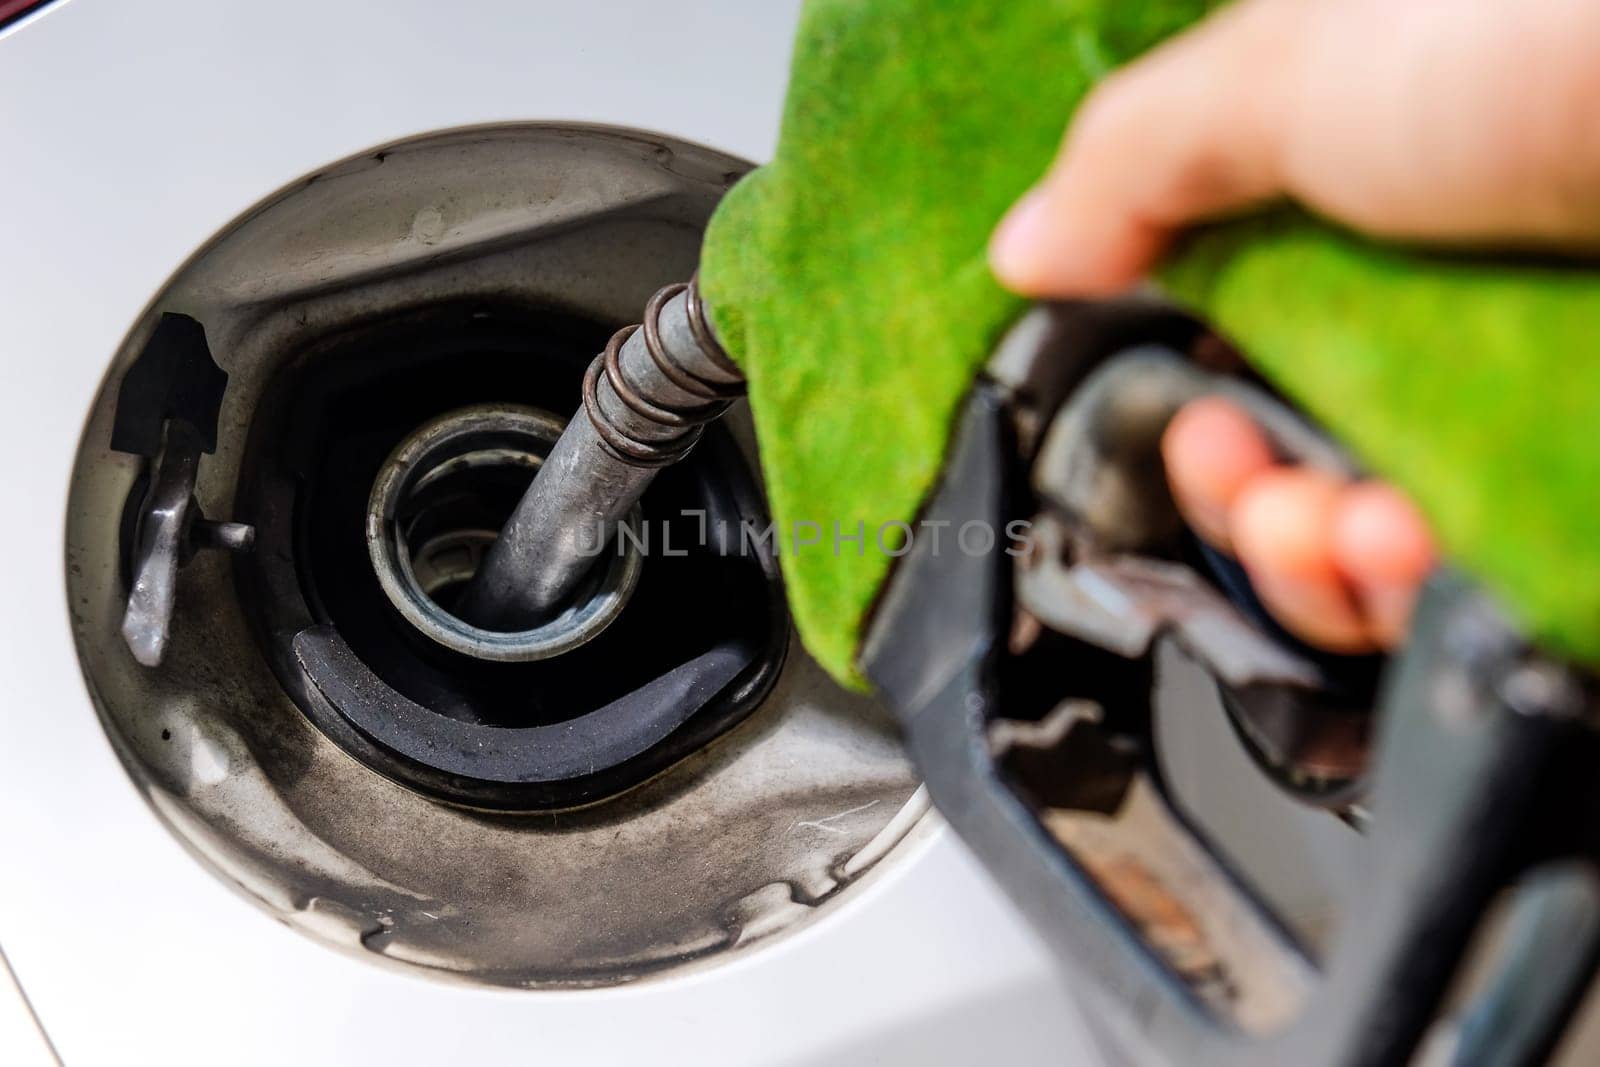 Close up image of hand refilling a car with fuel at a gas station, green fuel nozzle,energy concept